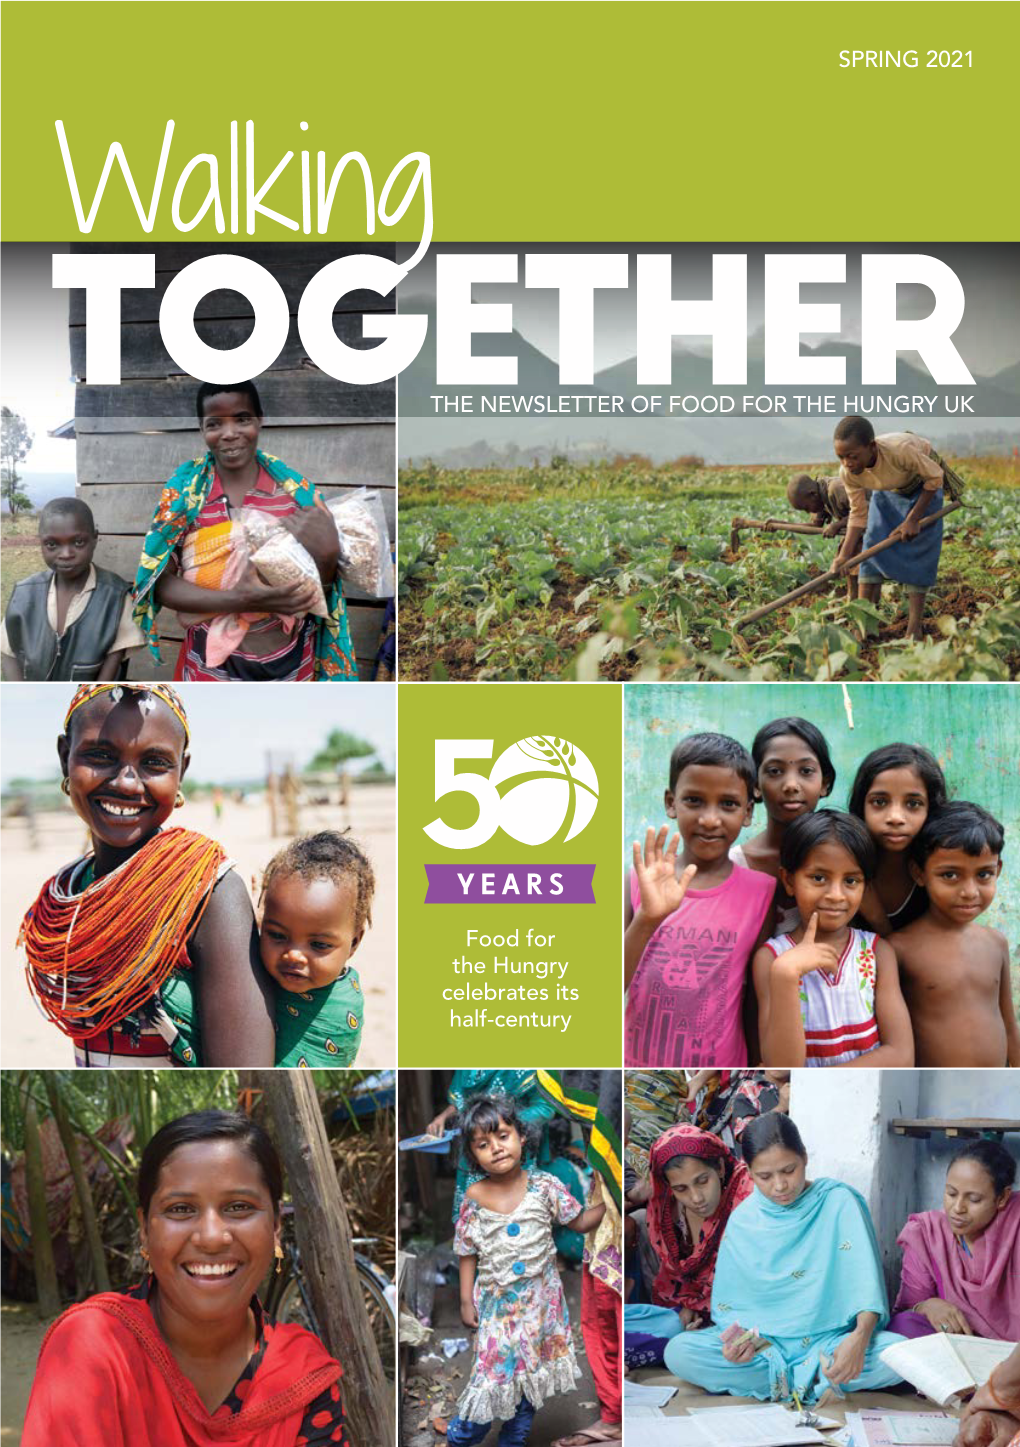 Walking Together the NEWSLETTER of FOOD for the HUNGRY UK